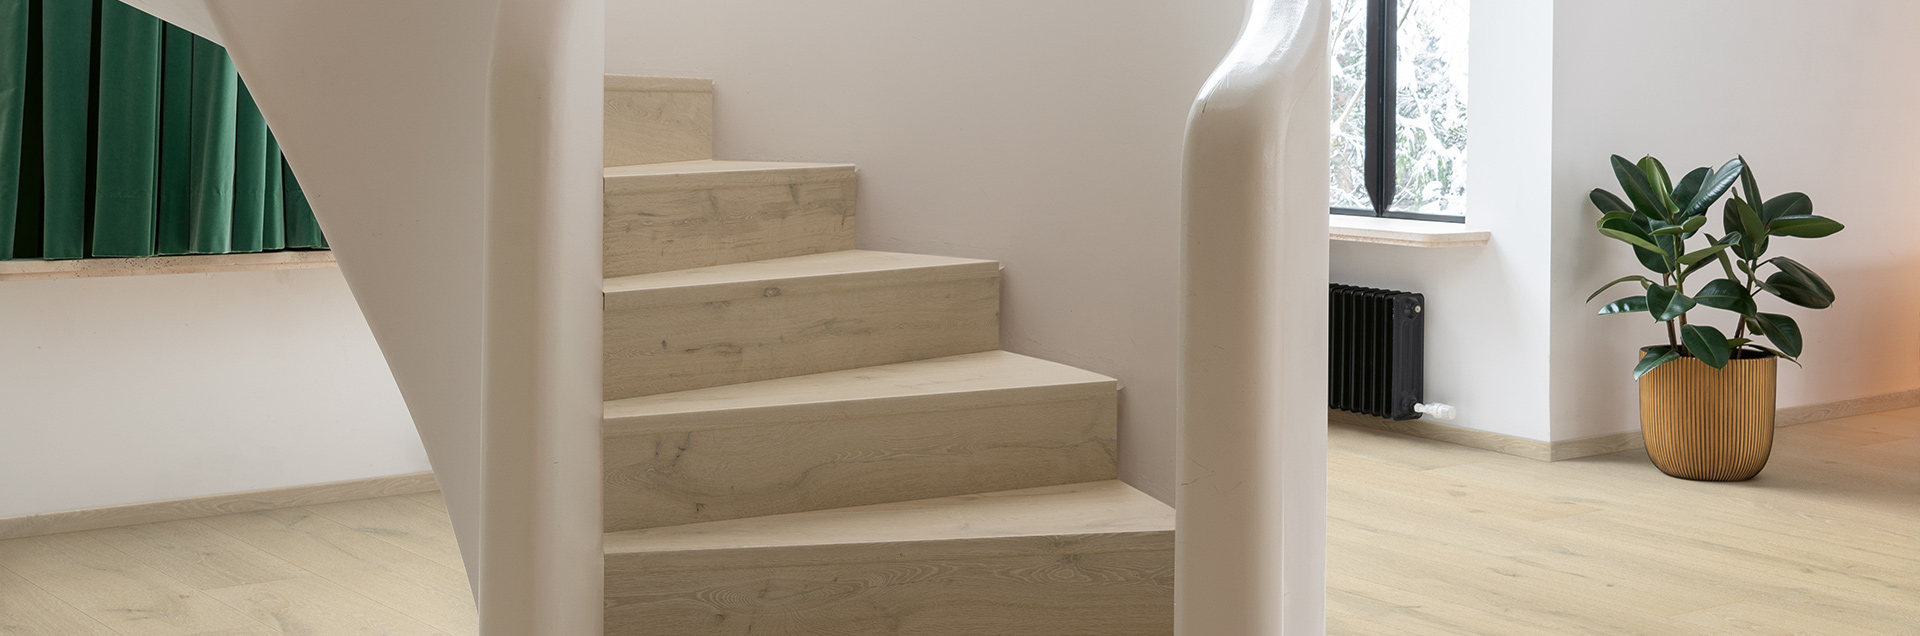 Quick-Step hardwood installation on stairs